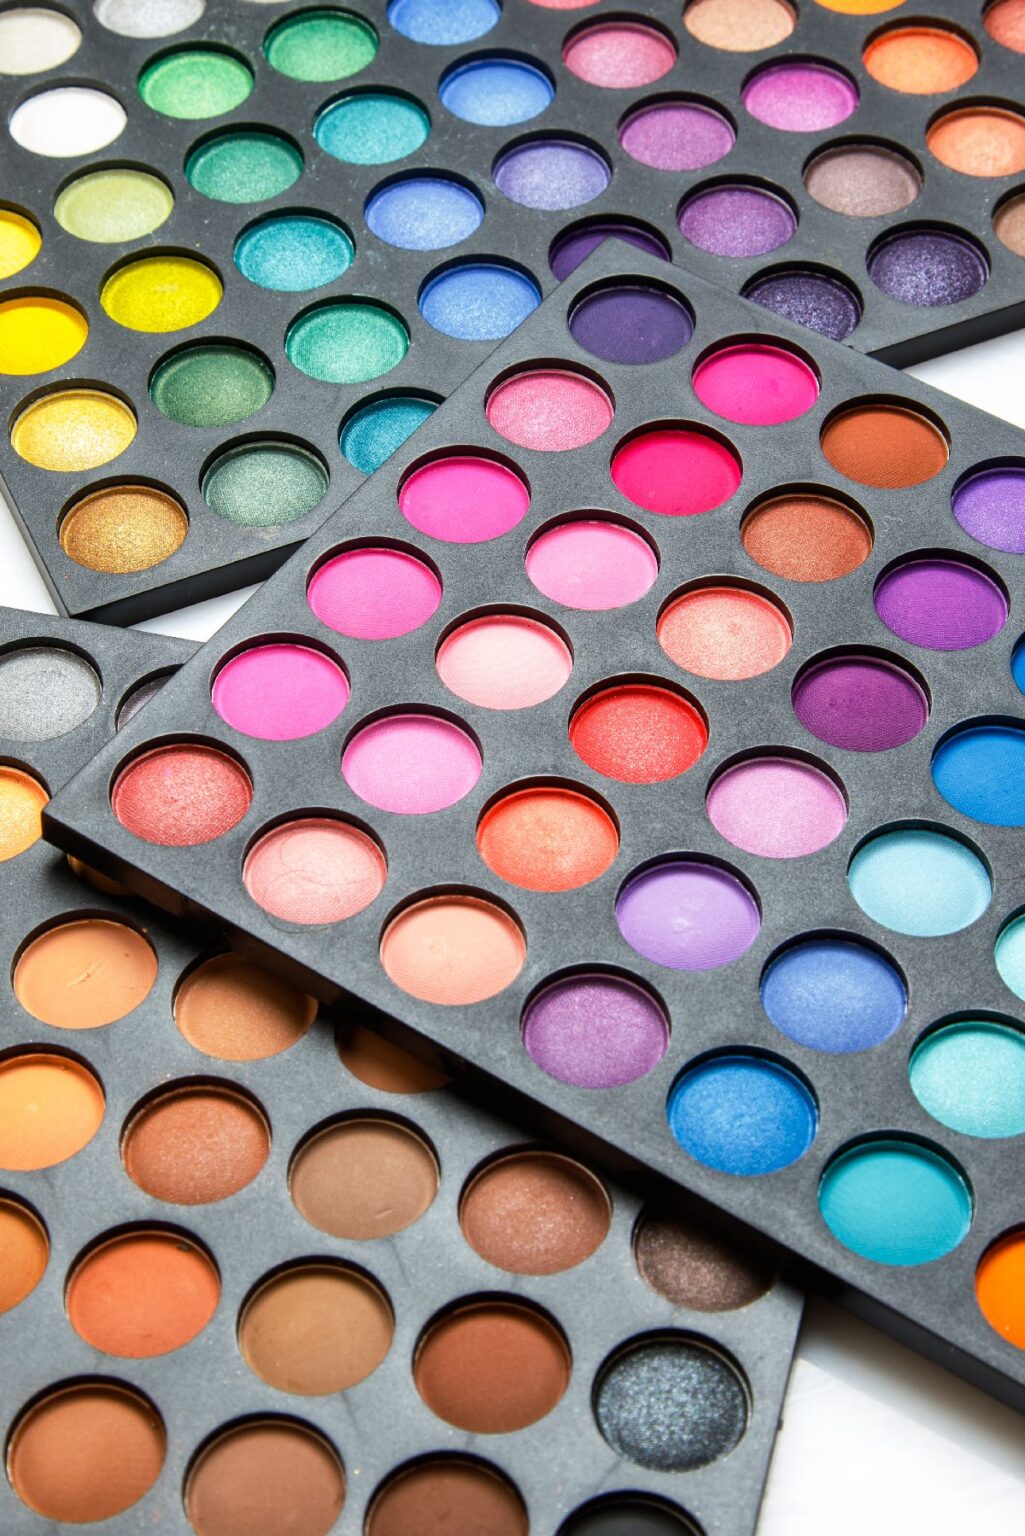 Couponing Makeup - How to Find the Best Prices on Cosmetics